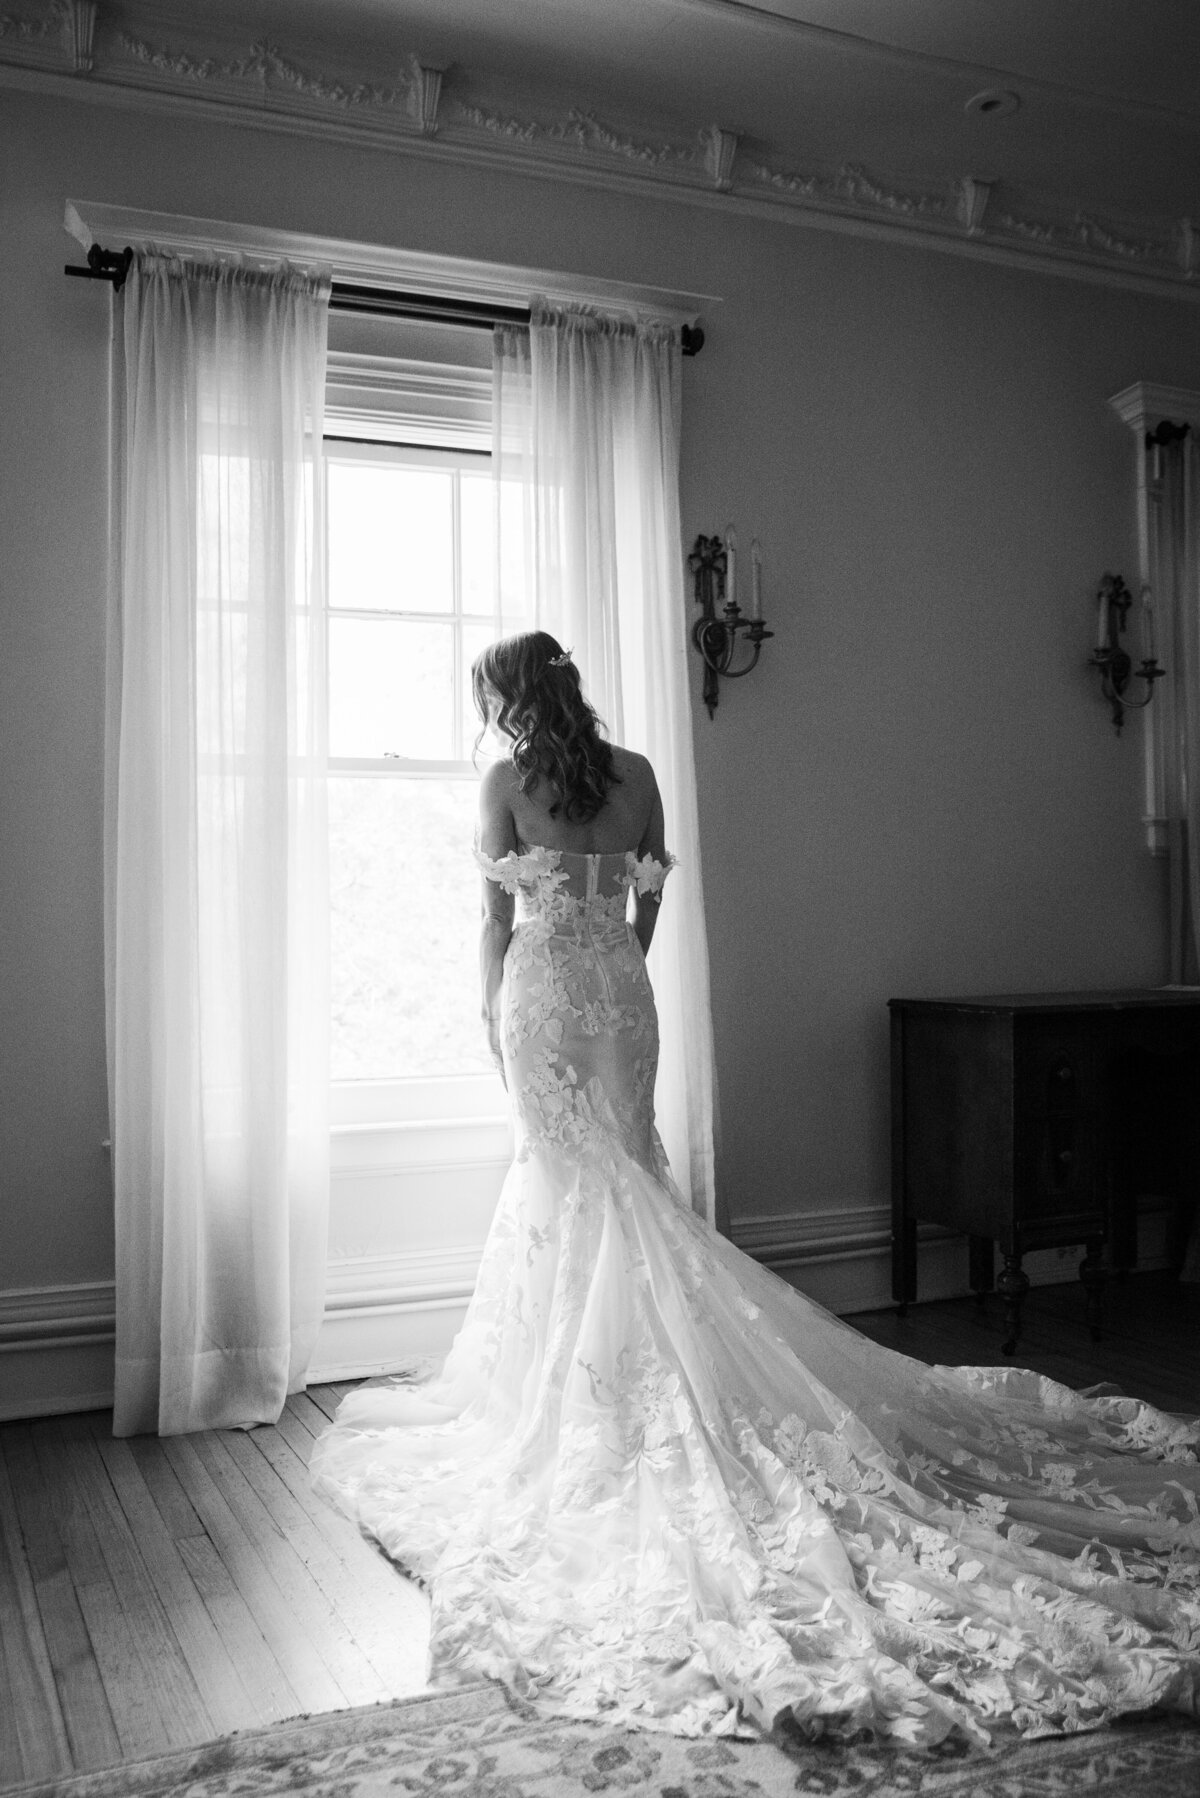 A bride faces away from the camera in her wedding dress as she stares out the window.